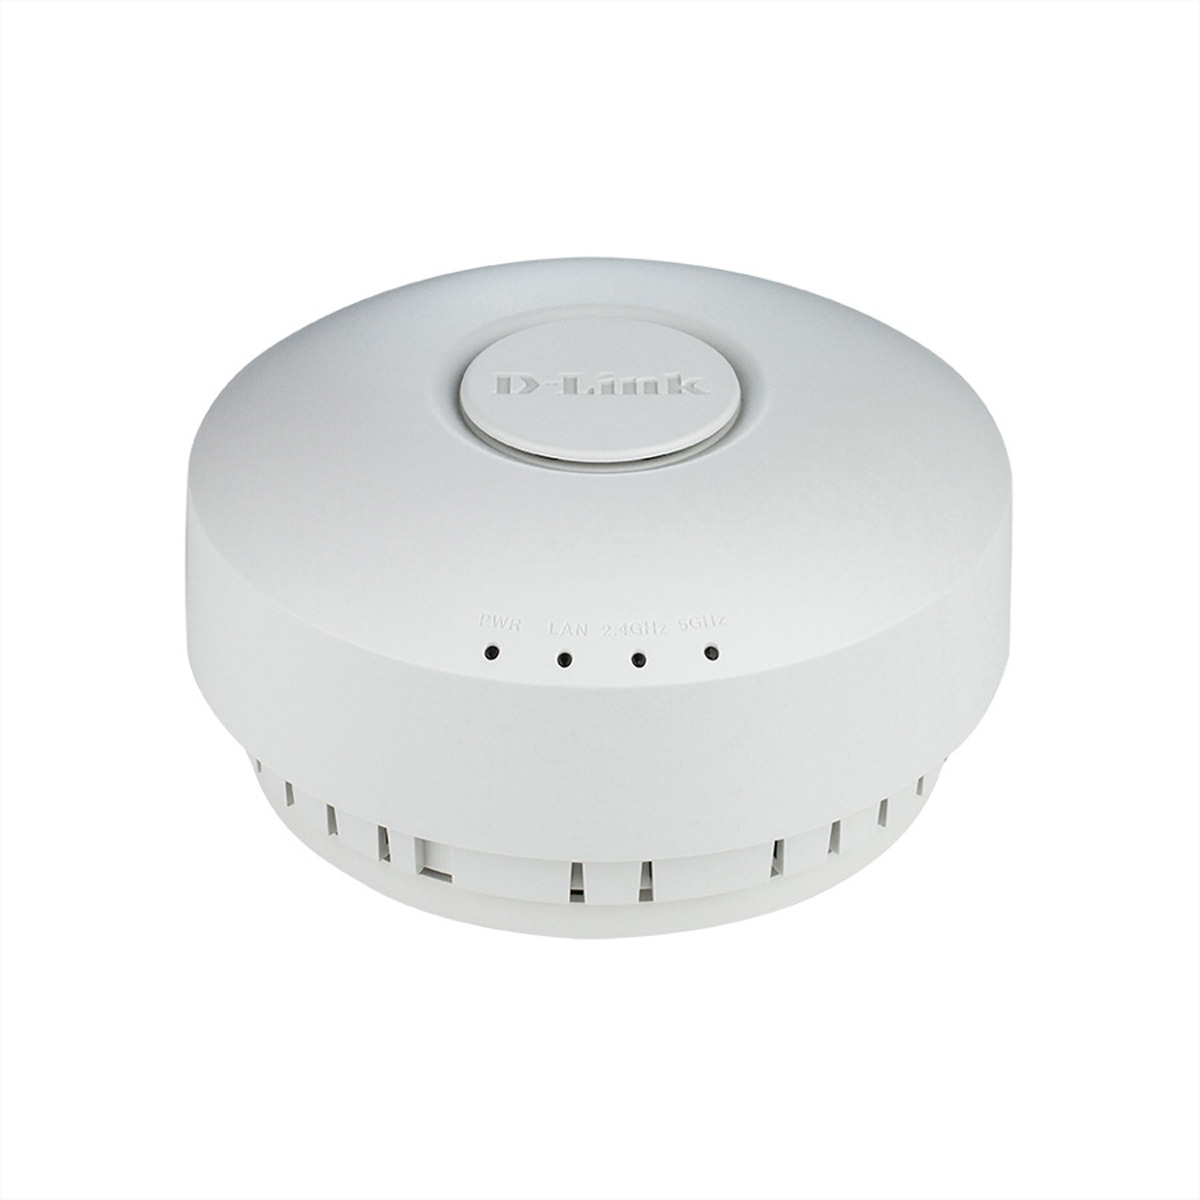 D-LINK DWL-6610AP Unified 1,2 Points Access WLAN Dualband AC1200 Gbit/s Point Access